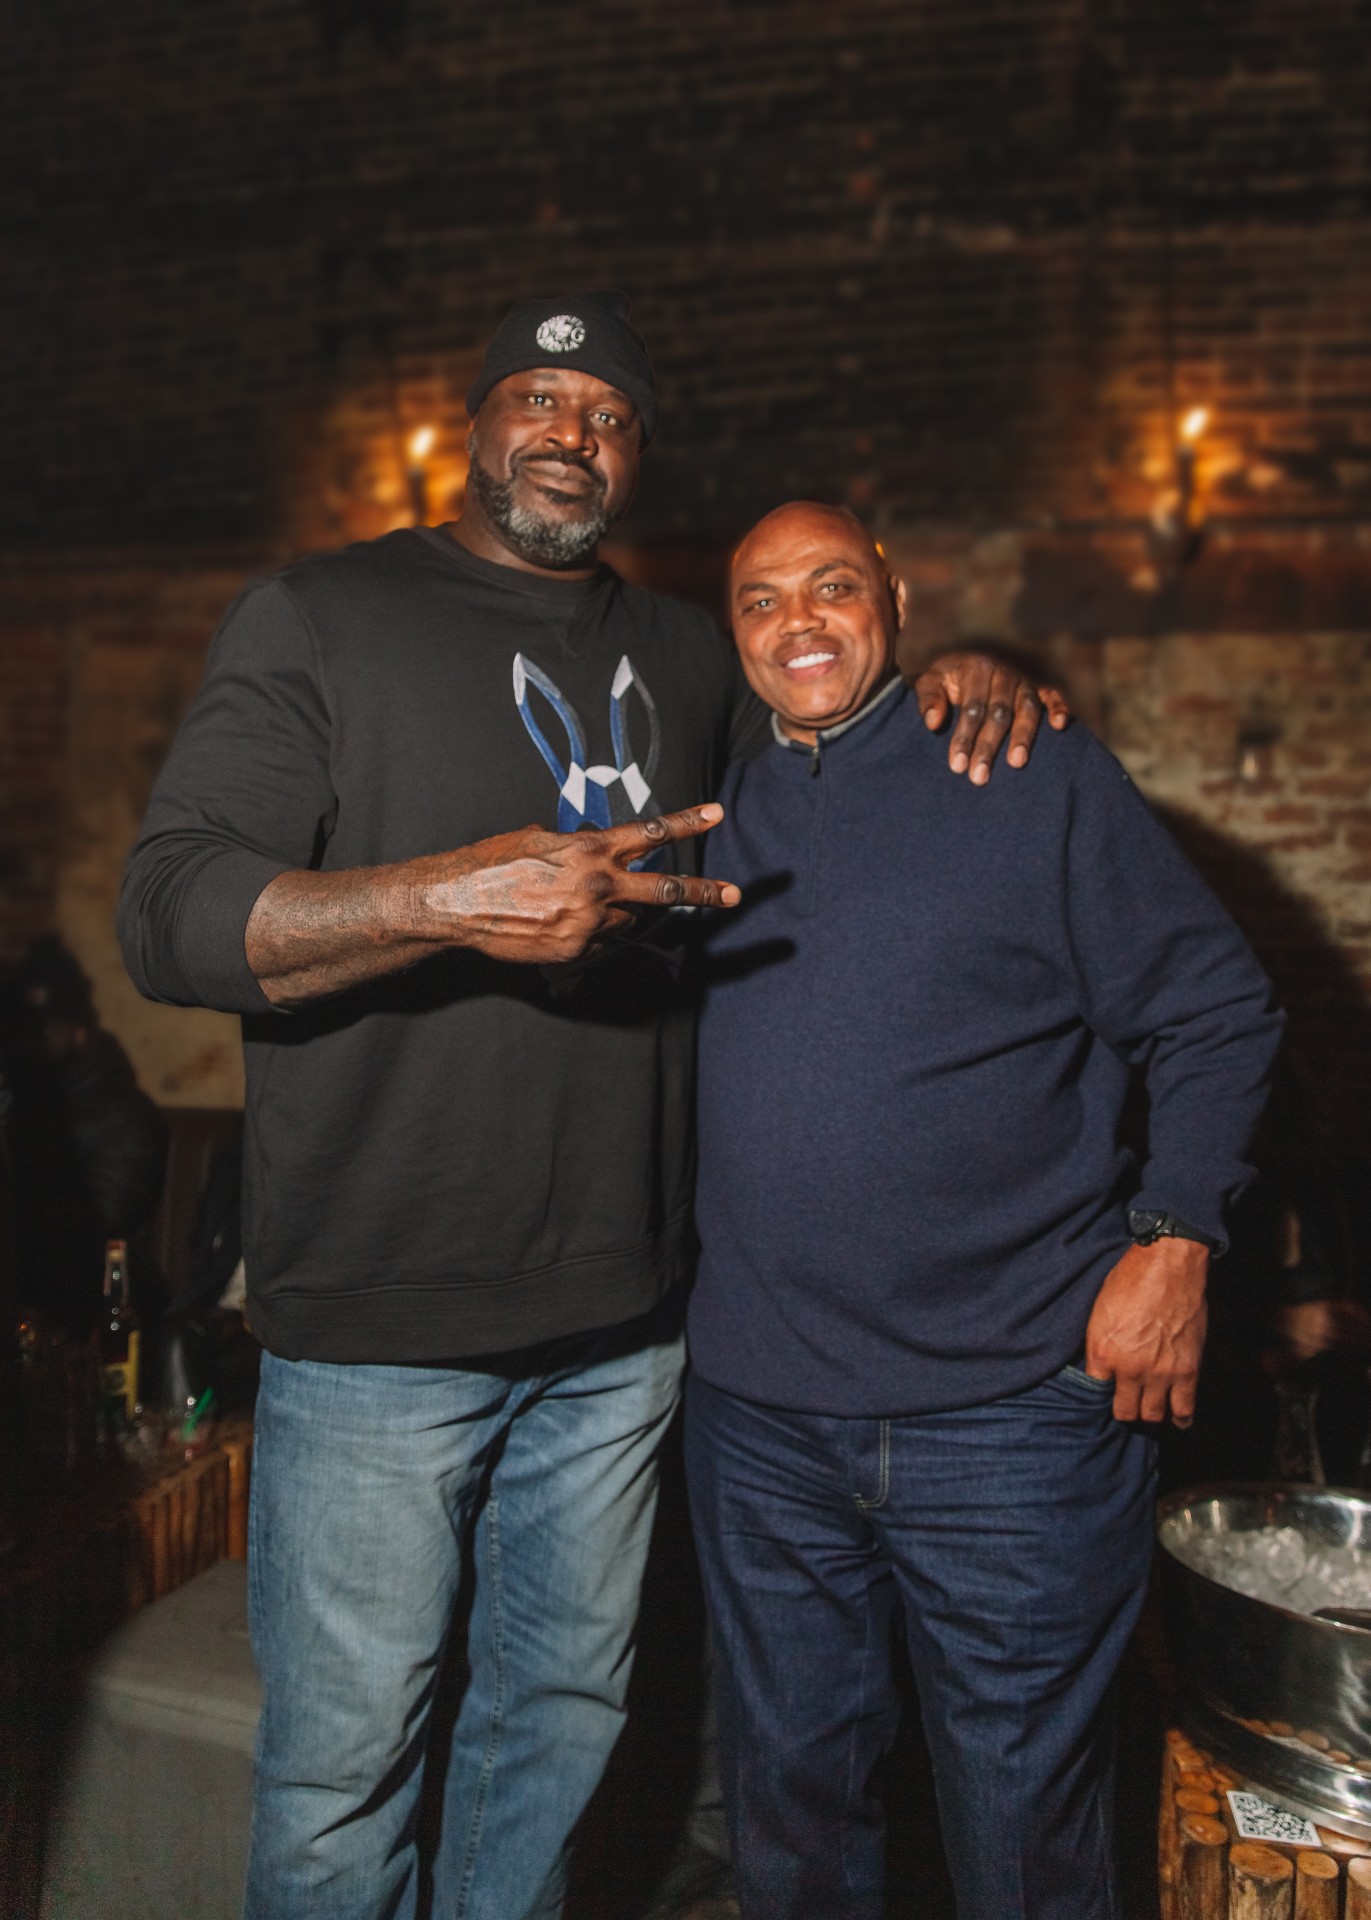 Charles Barkley celebrated his Food &#038; Beverage Magazine February issue cover over All Star Weekend in Cleveland, Ohio.